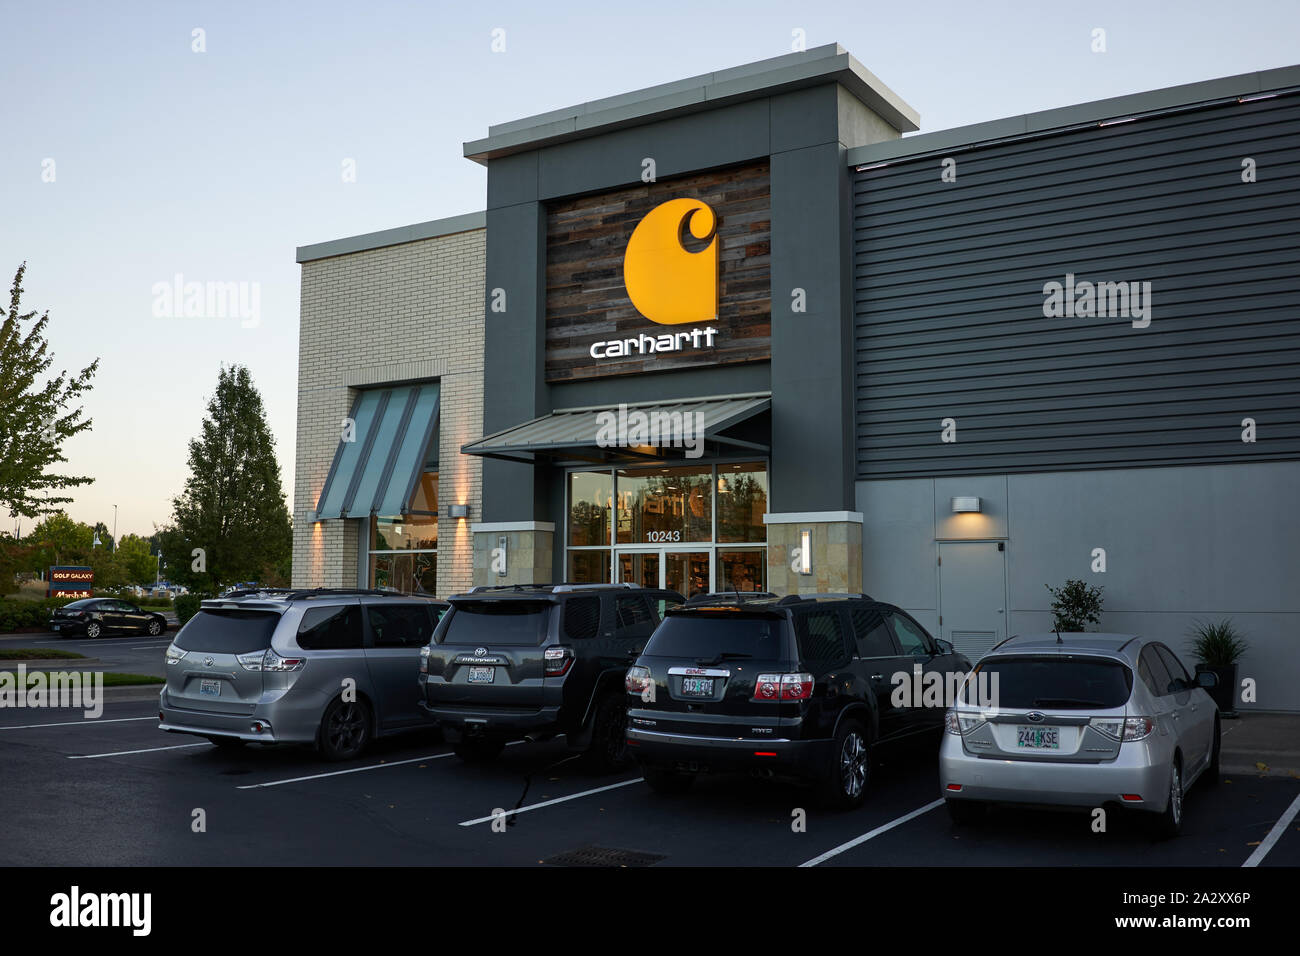 Carhartt Store in Portland's Cascade Station Shopping Center at dusk. Carhartt, Inc., is an American apparel company known for its work clothes. Stock Photo